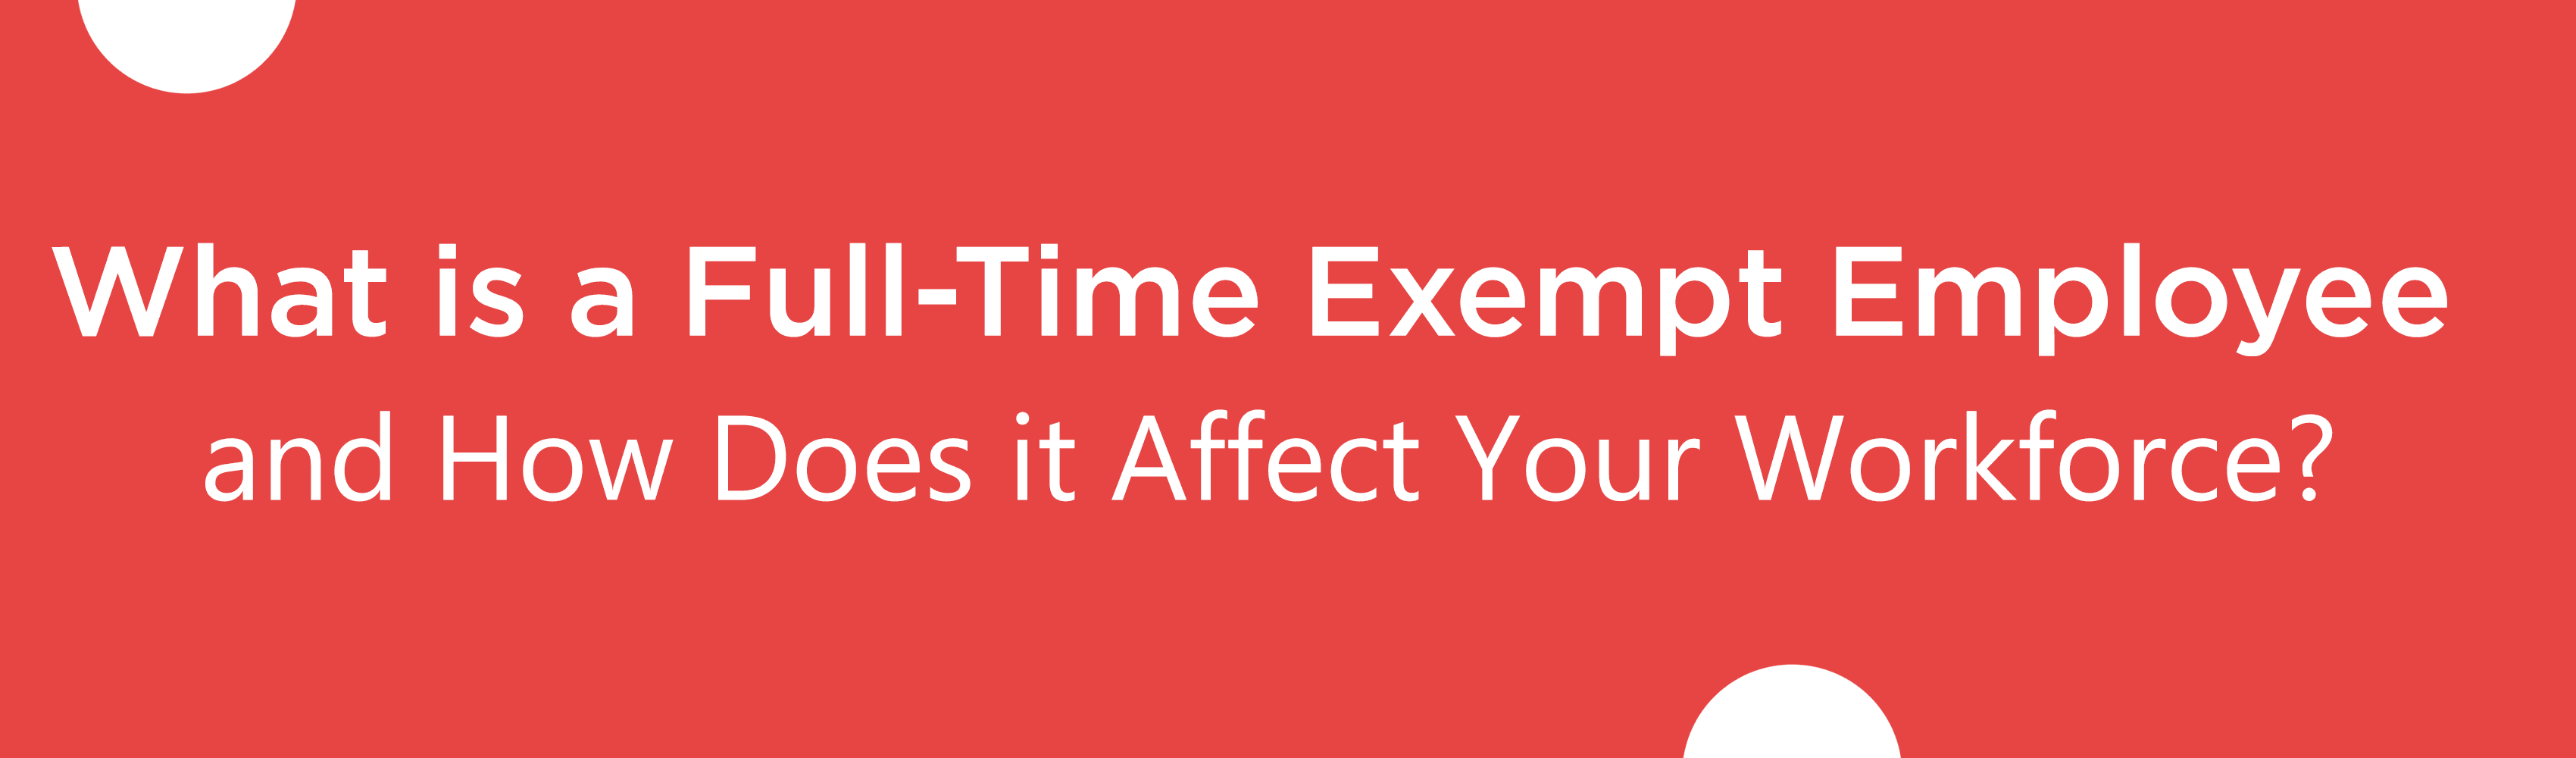 What is a Full-Time Exempt Employee and How Does it Affect Your Workforce?